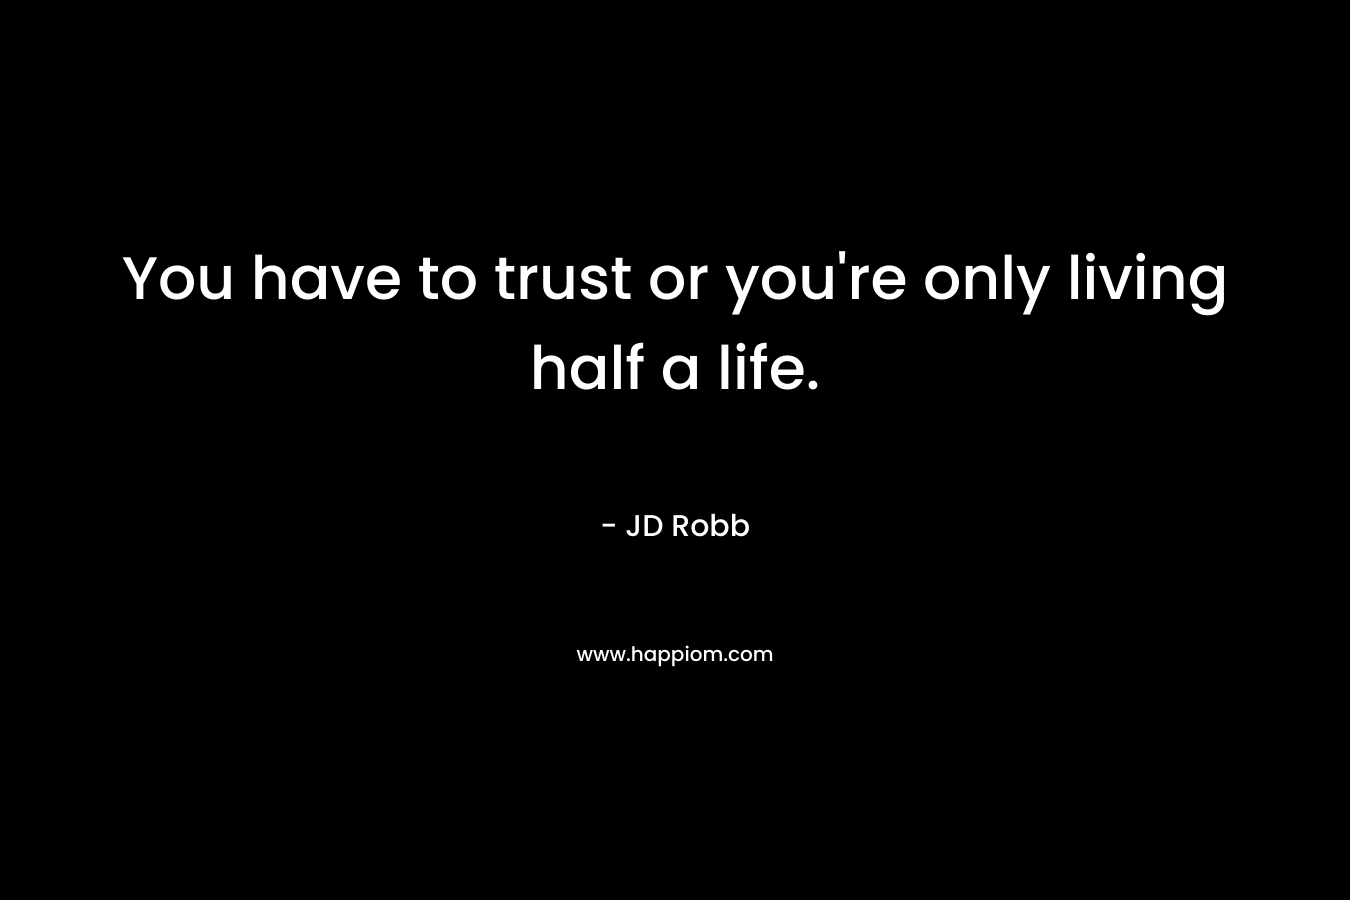 You have to trust or you’re only living half a life. – JD Robb